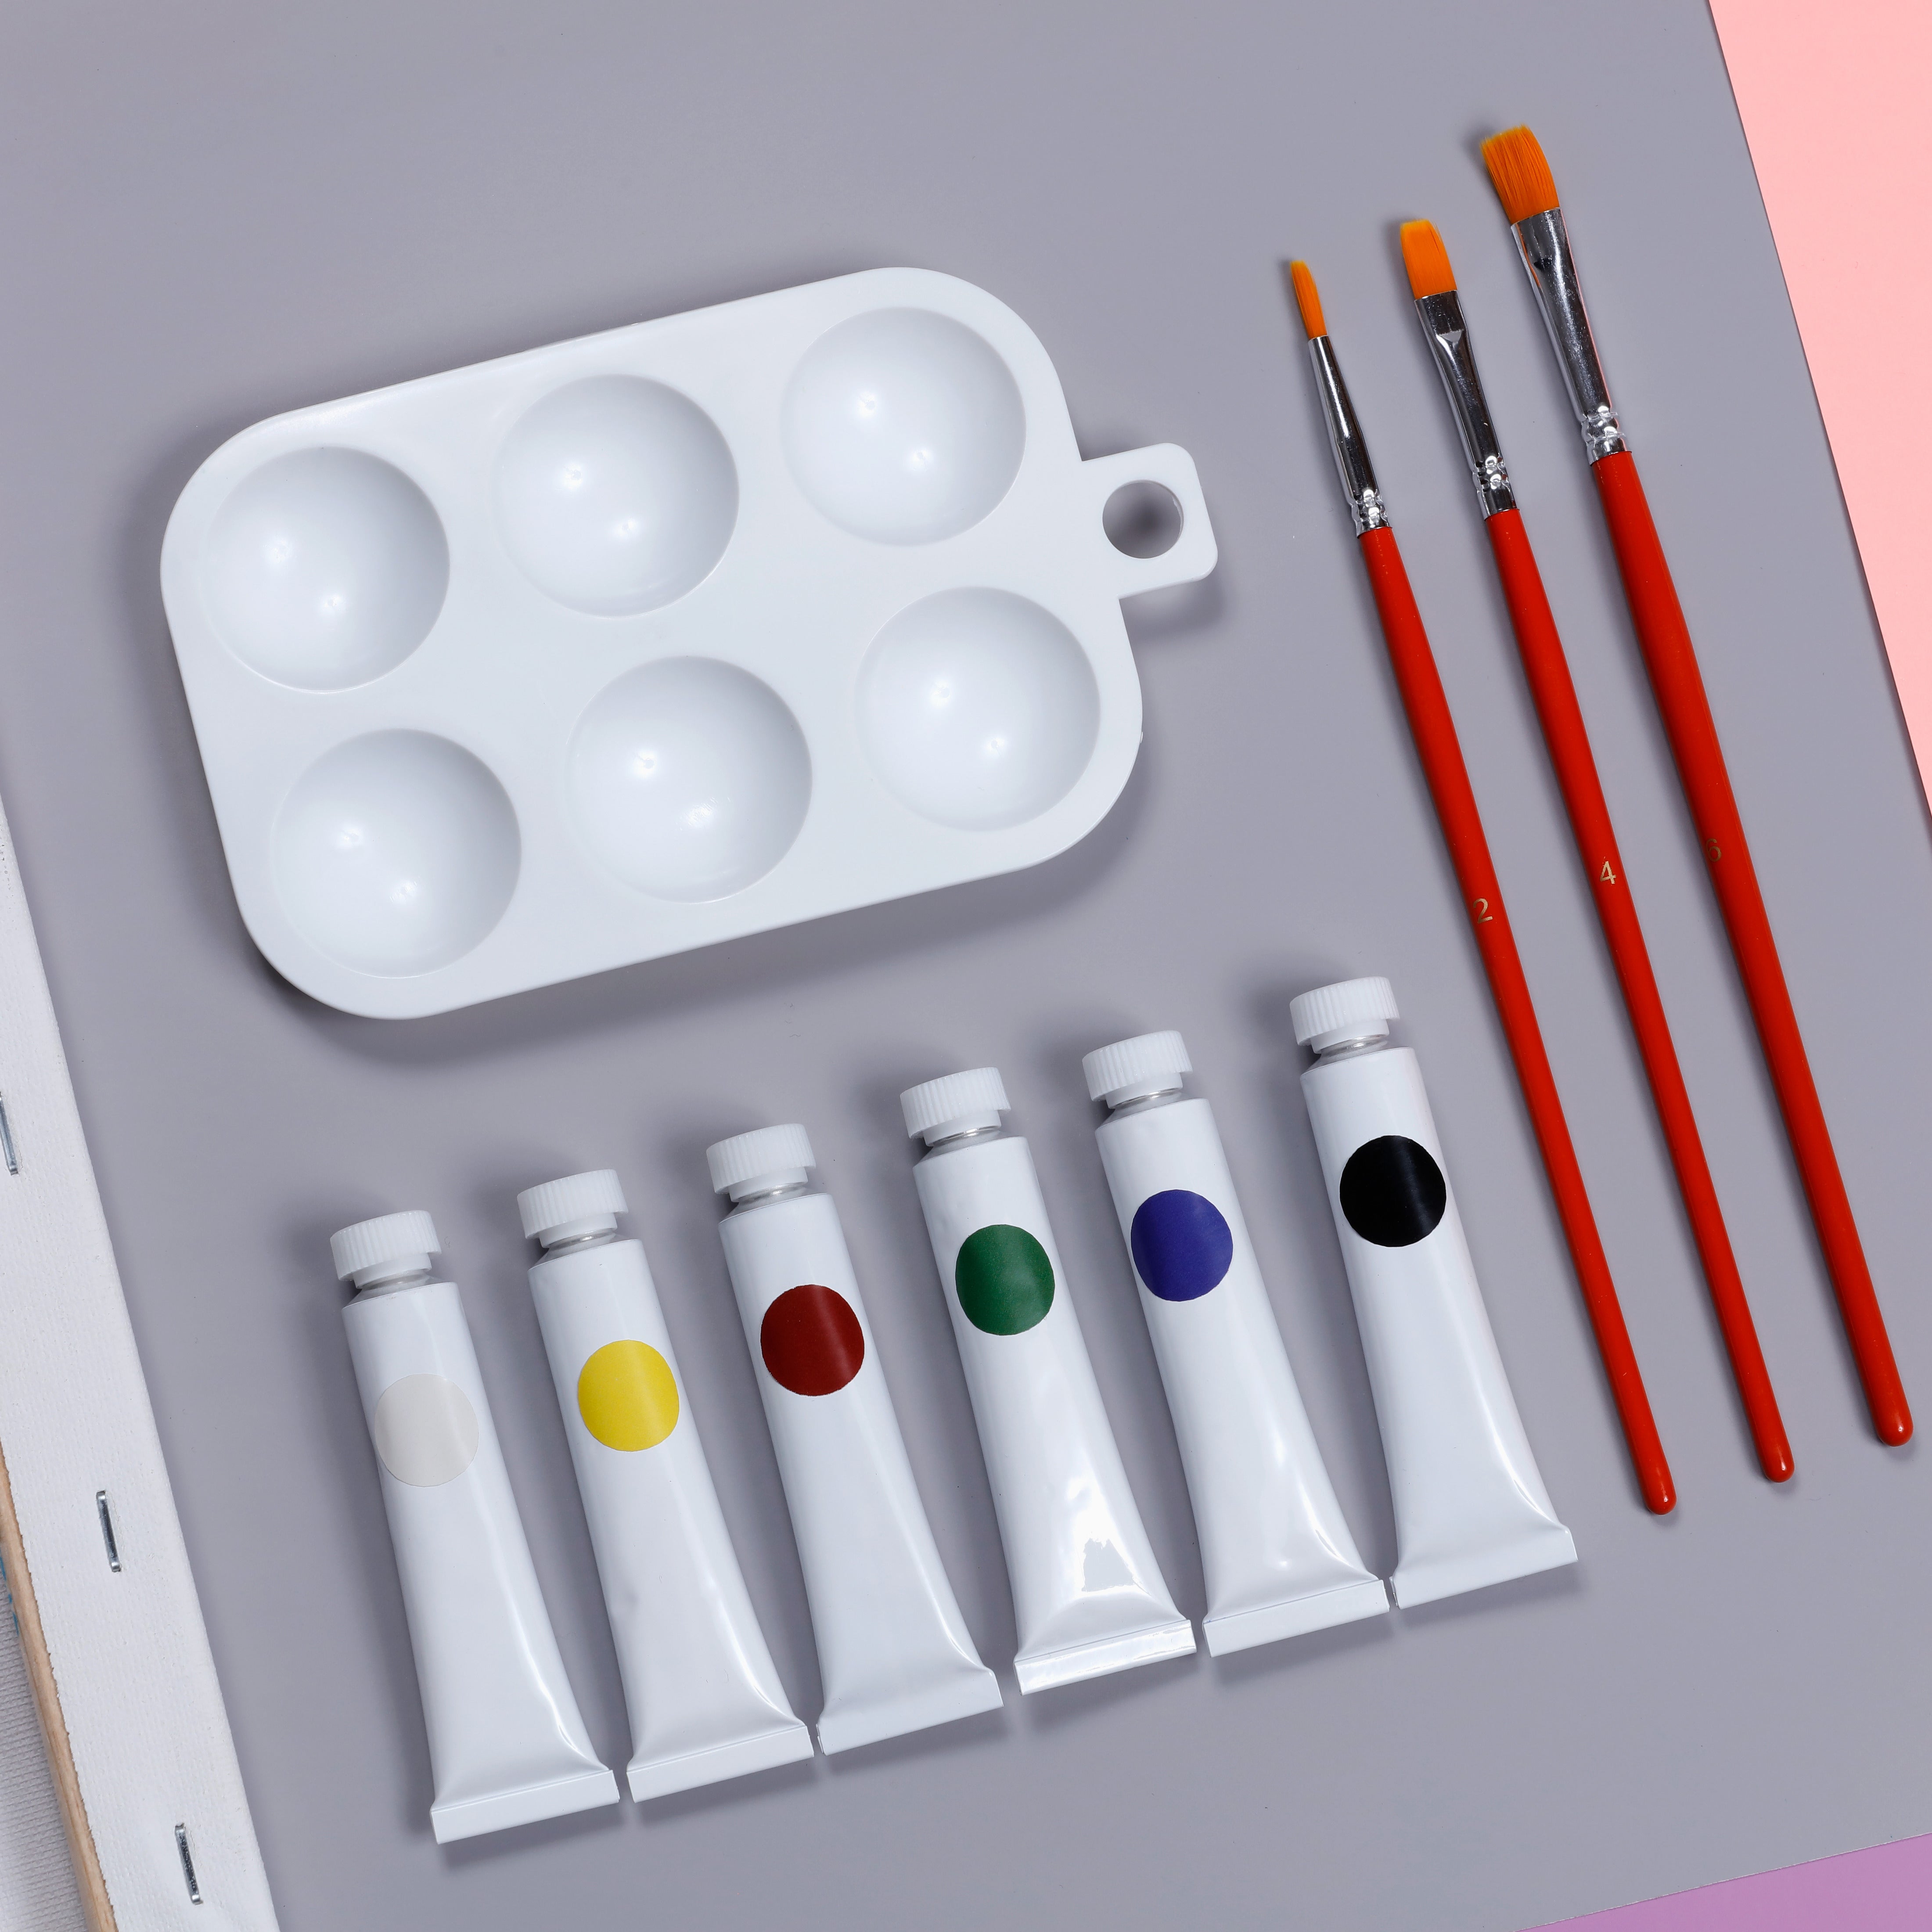 Incraftables Canvas and Paint Set for Adults. Acrylic Painting Kit with 3  Canvases 3 Brushes 6 Acrylic Colors Palette Painting Kit for Kids